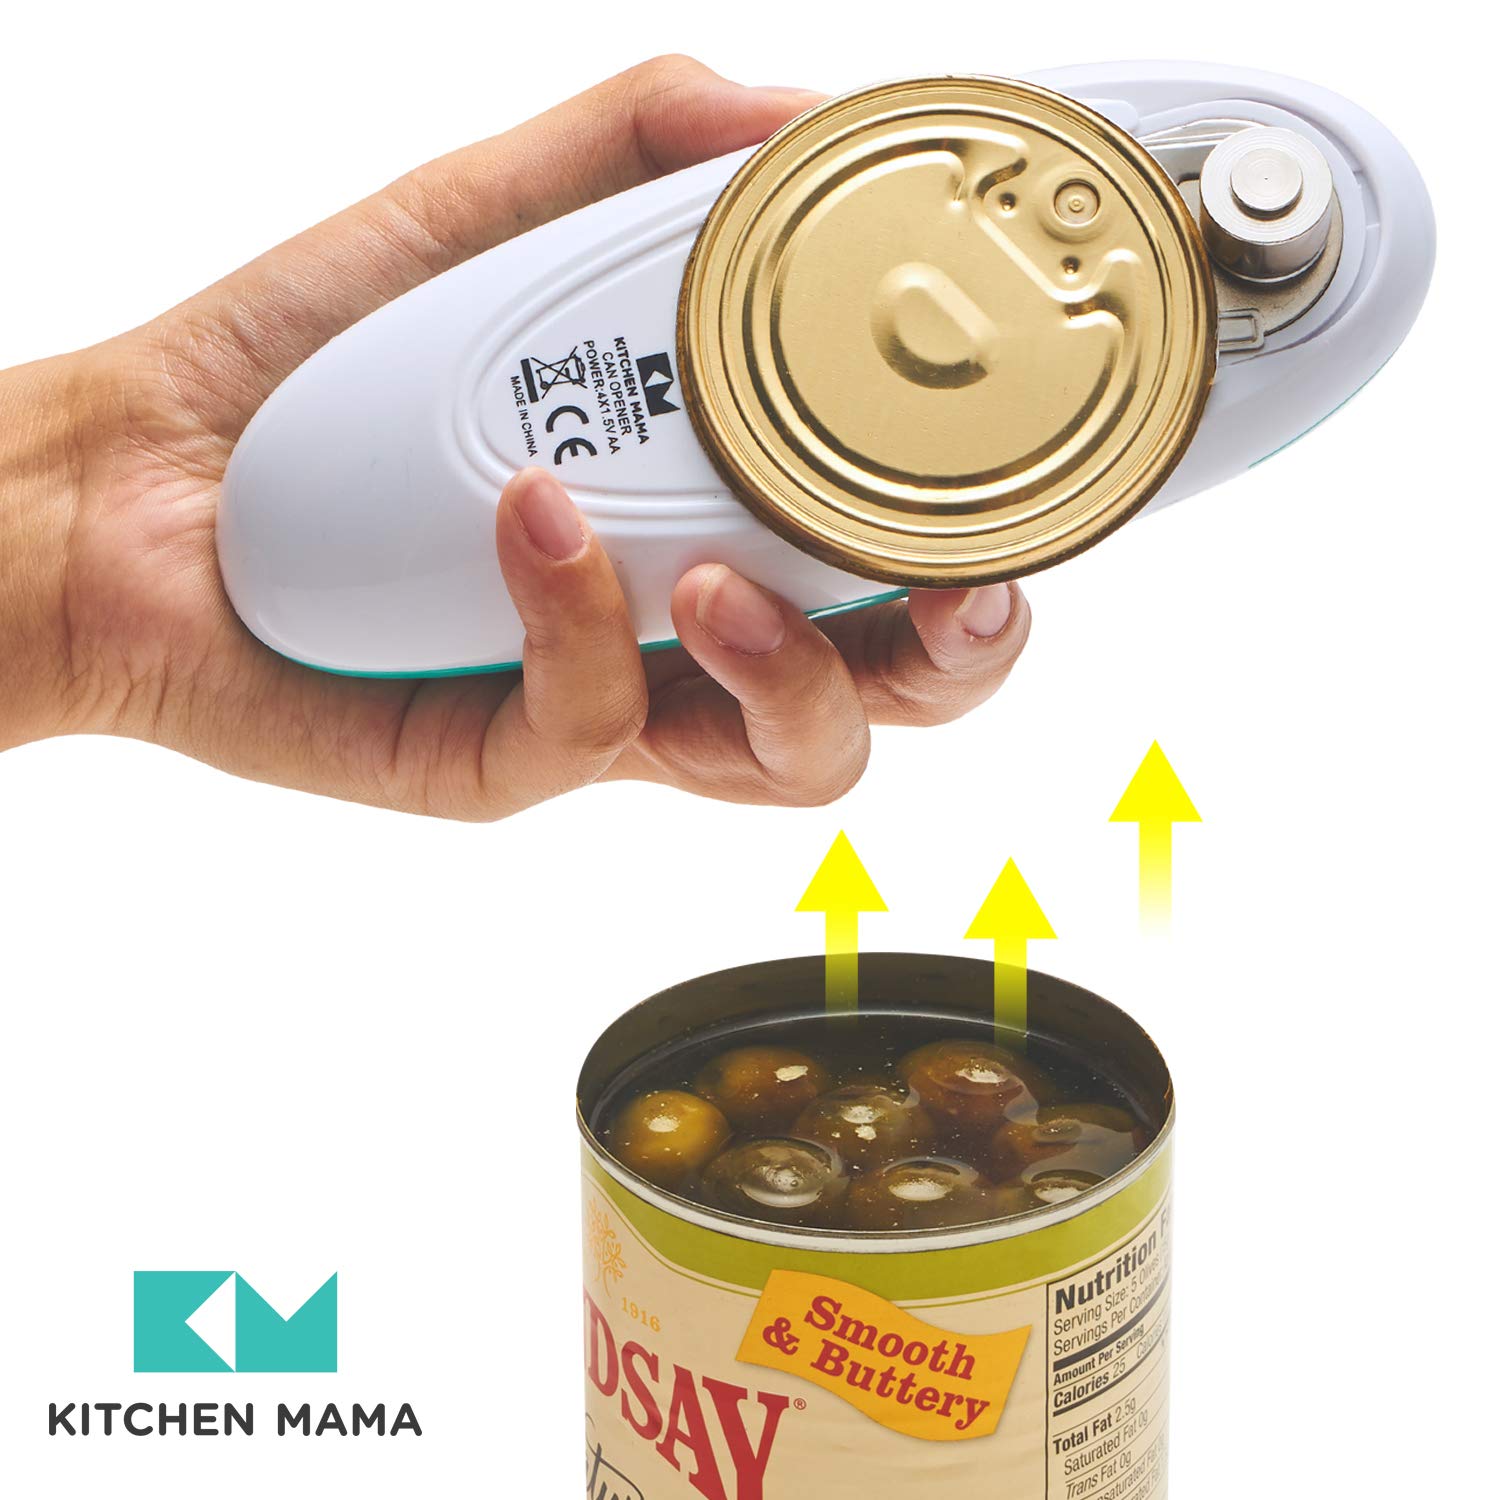 Kitchen Mama Auto Electric Can Opener: Open Your Cans with A Simple Press of Button - Automatic, Hands Free, Smooth Edge, Food-Safe, Battery Operated, YES YOU CAN (Teal)